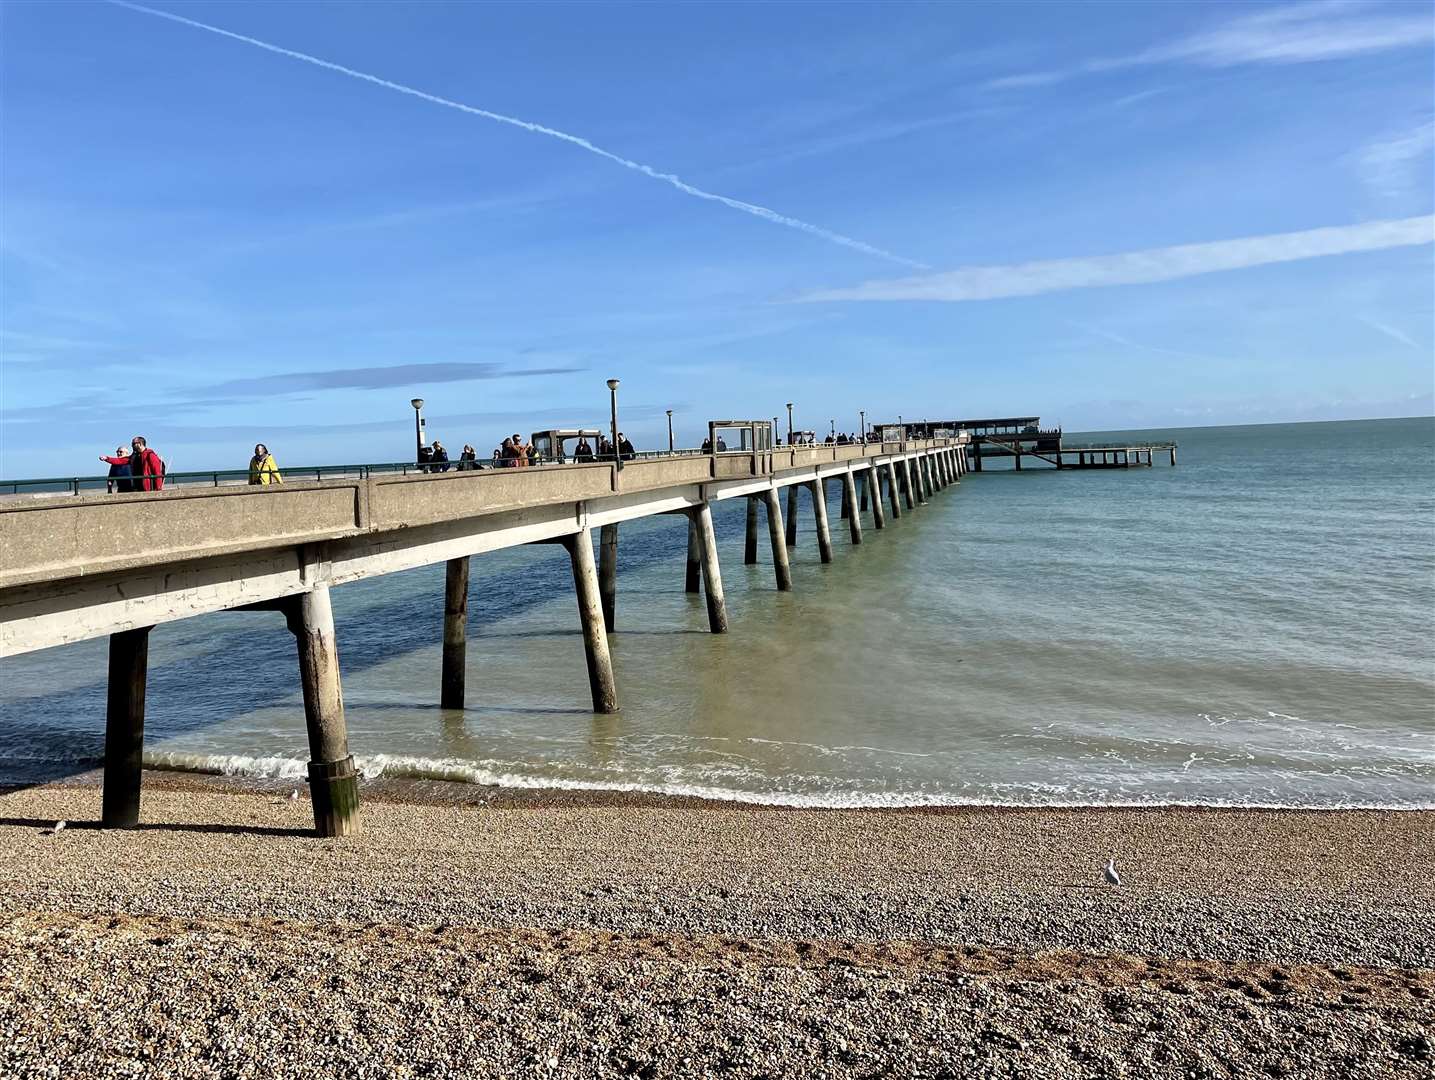 The Waterfront Hotel has great views over Deal Pier, which sits directly in front of the hotel